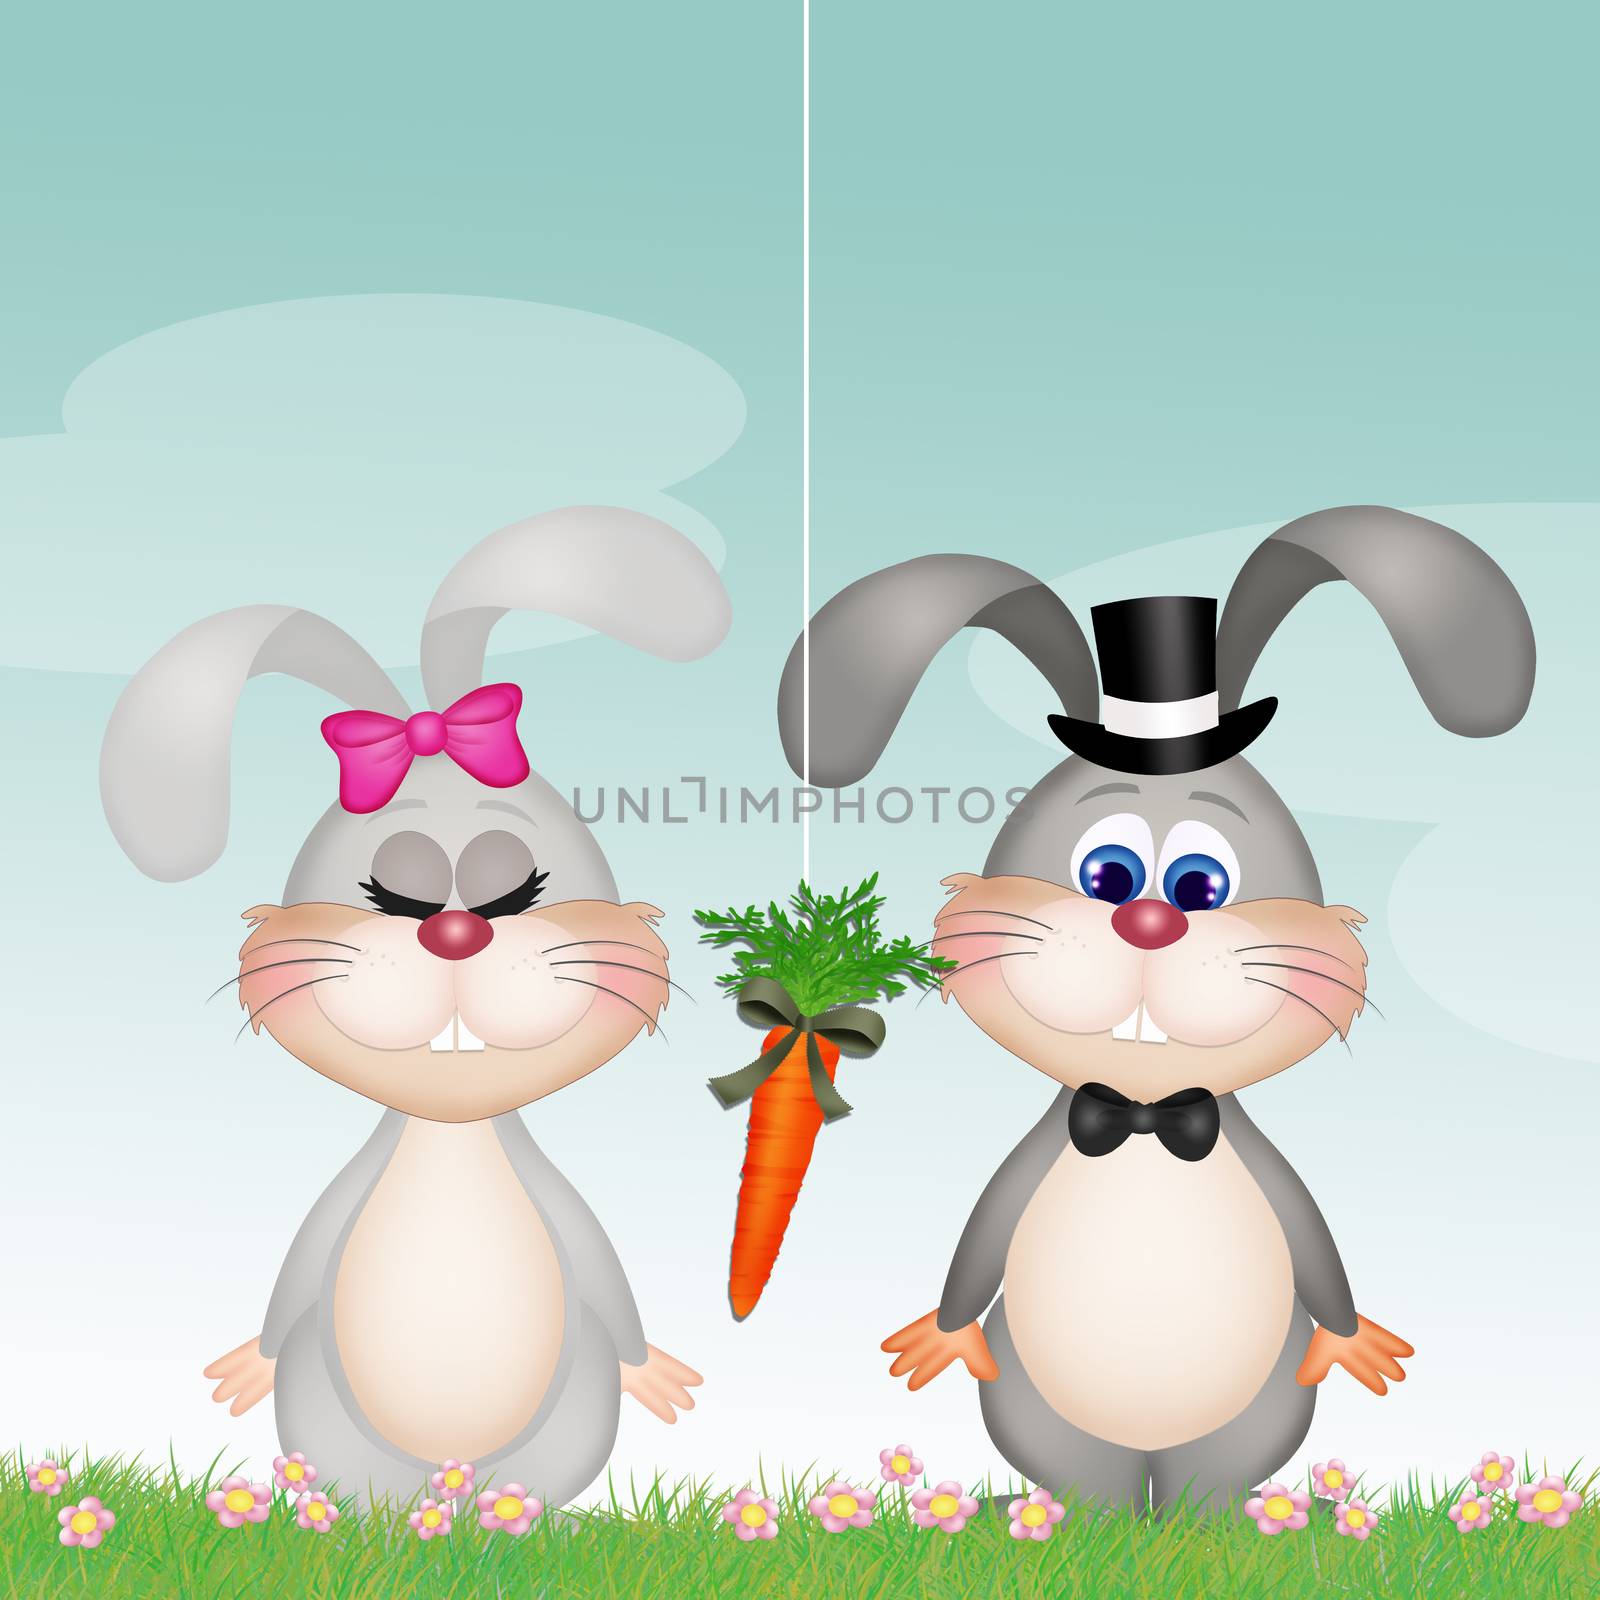 illustration of bunnies with carrot